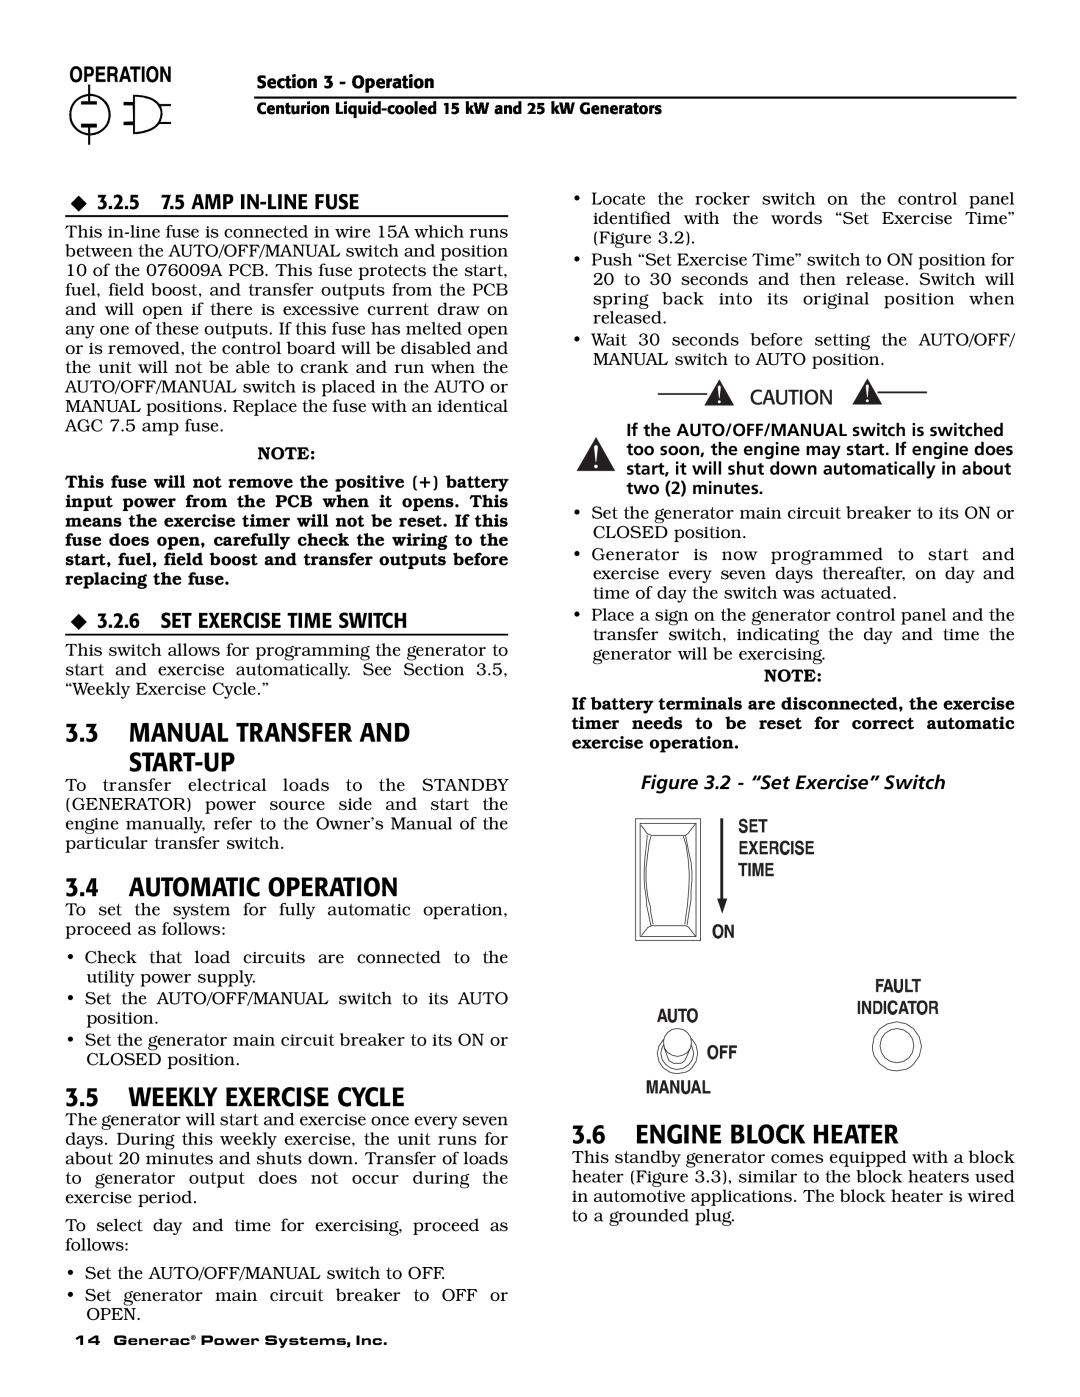 Generac 004912-0, 004912-1, 004913-0, 004913-1 owner manual 3.3MANUAL TRANSFER AND START-UP, 3.4AUTOMATIC OPERATION 